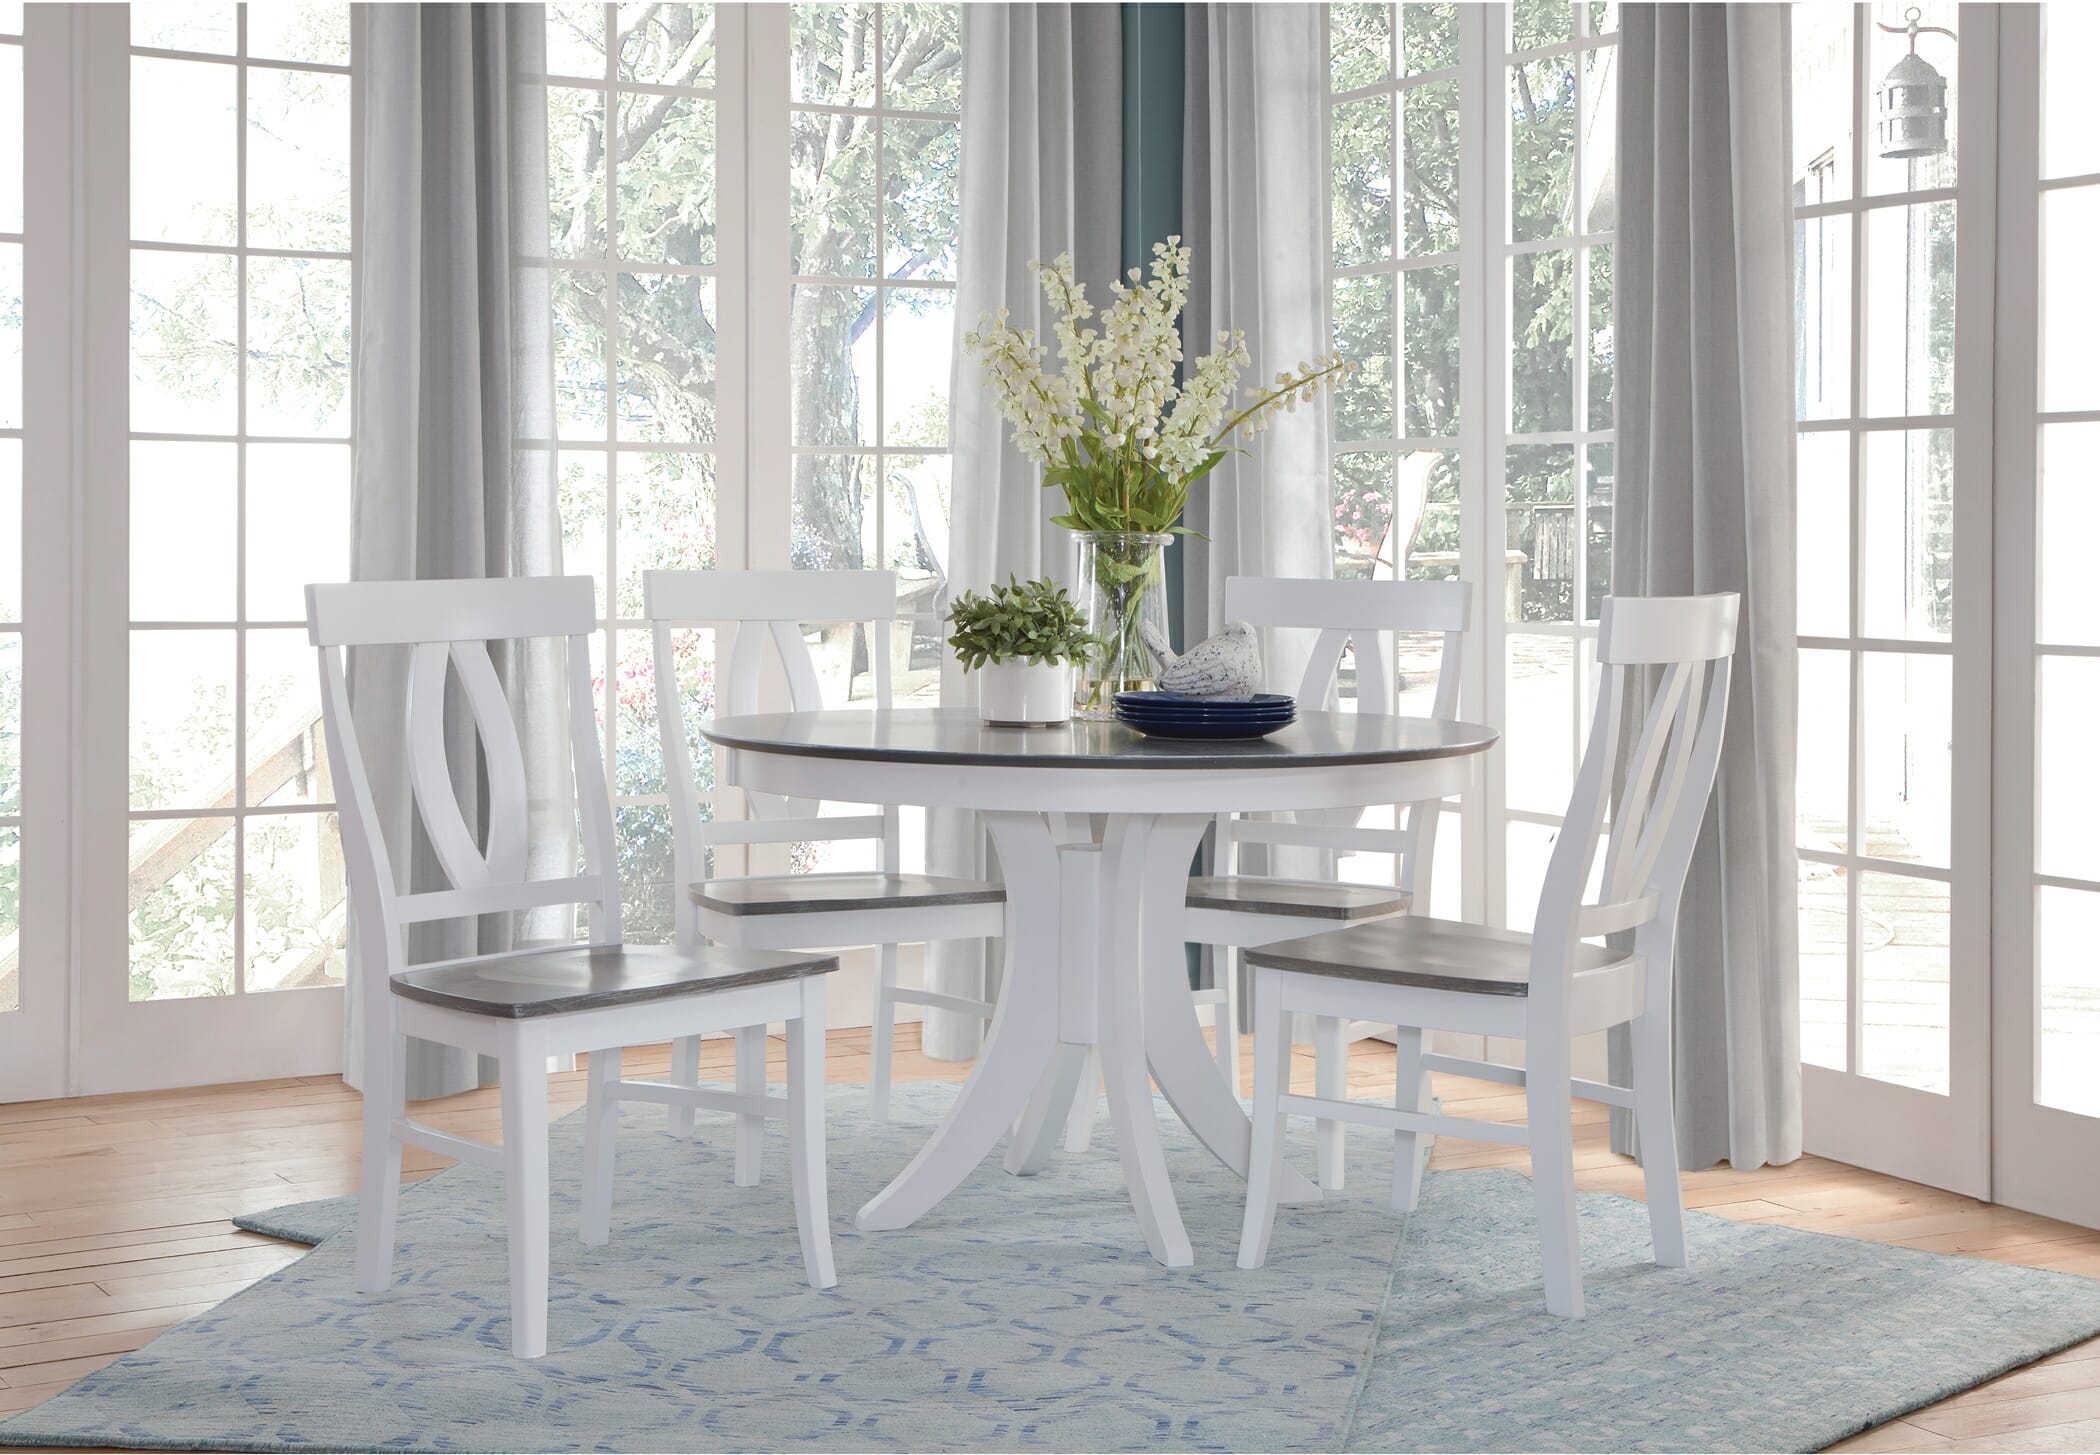 Ww59 Grey And White Round 5 Piece Set, White And Grey Round Dining Table Set